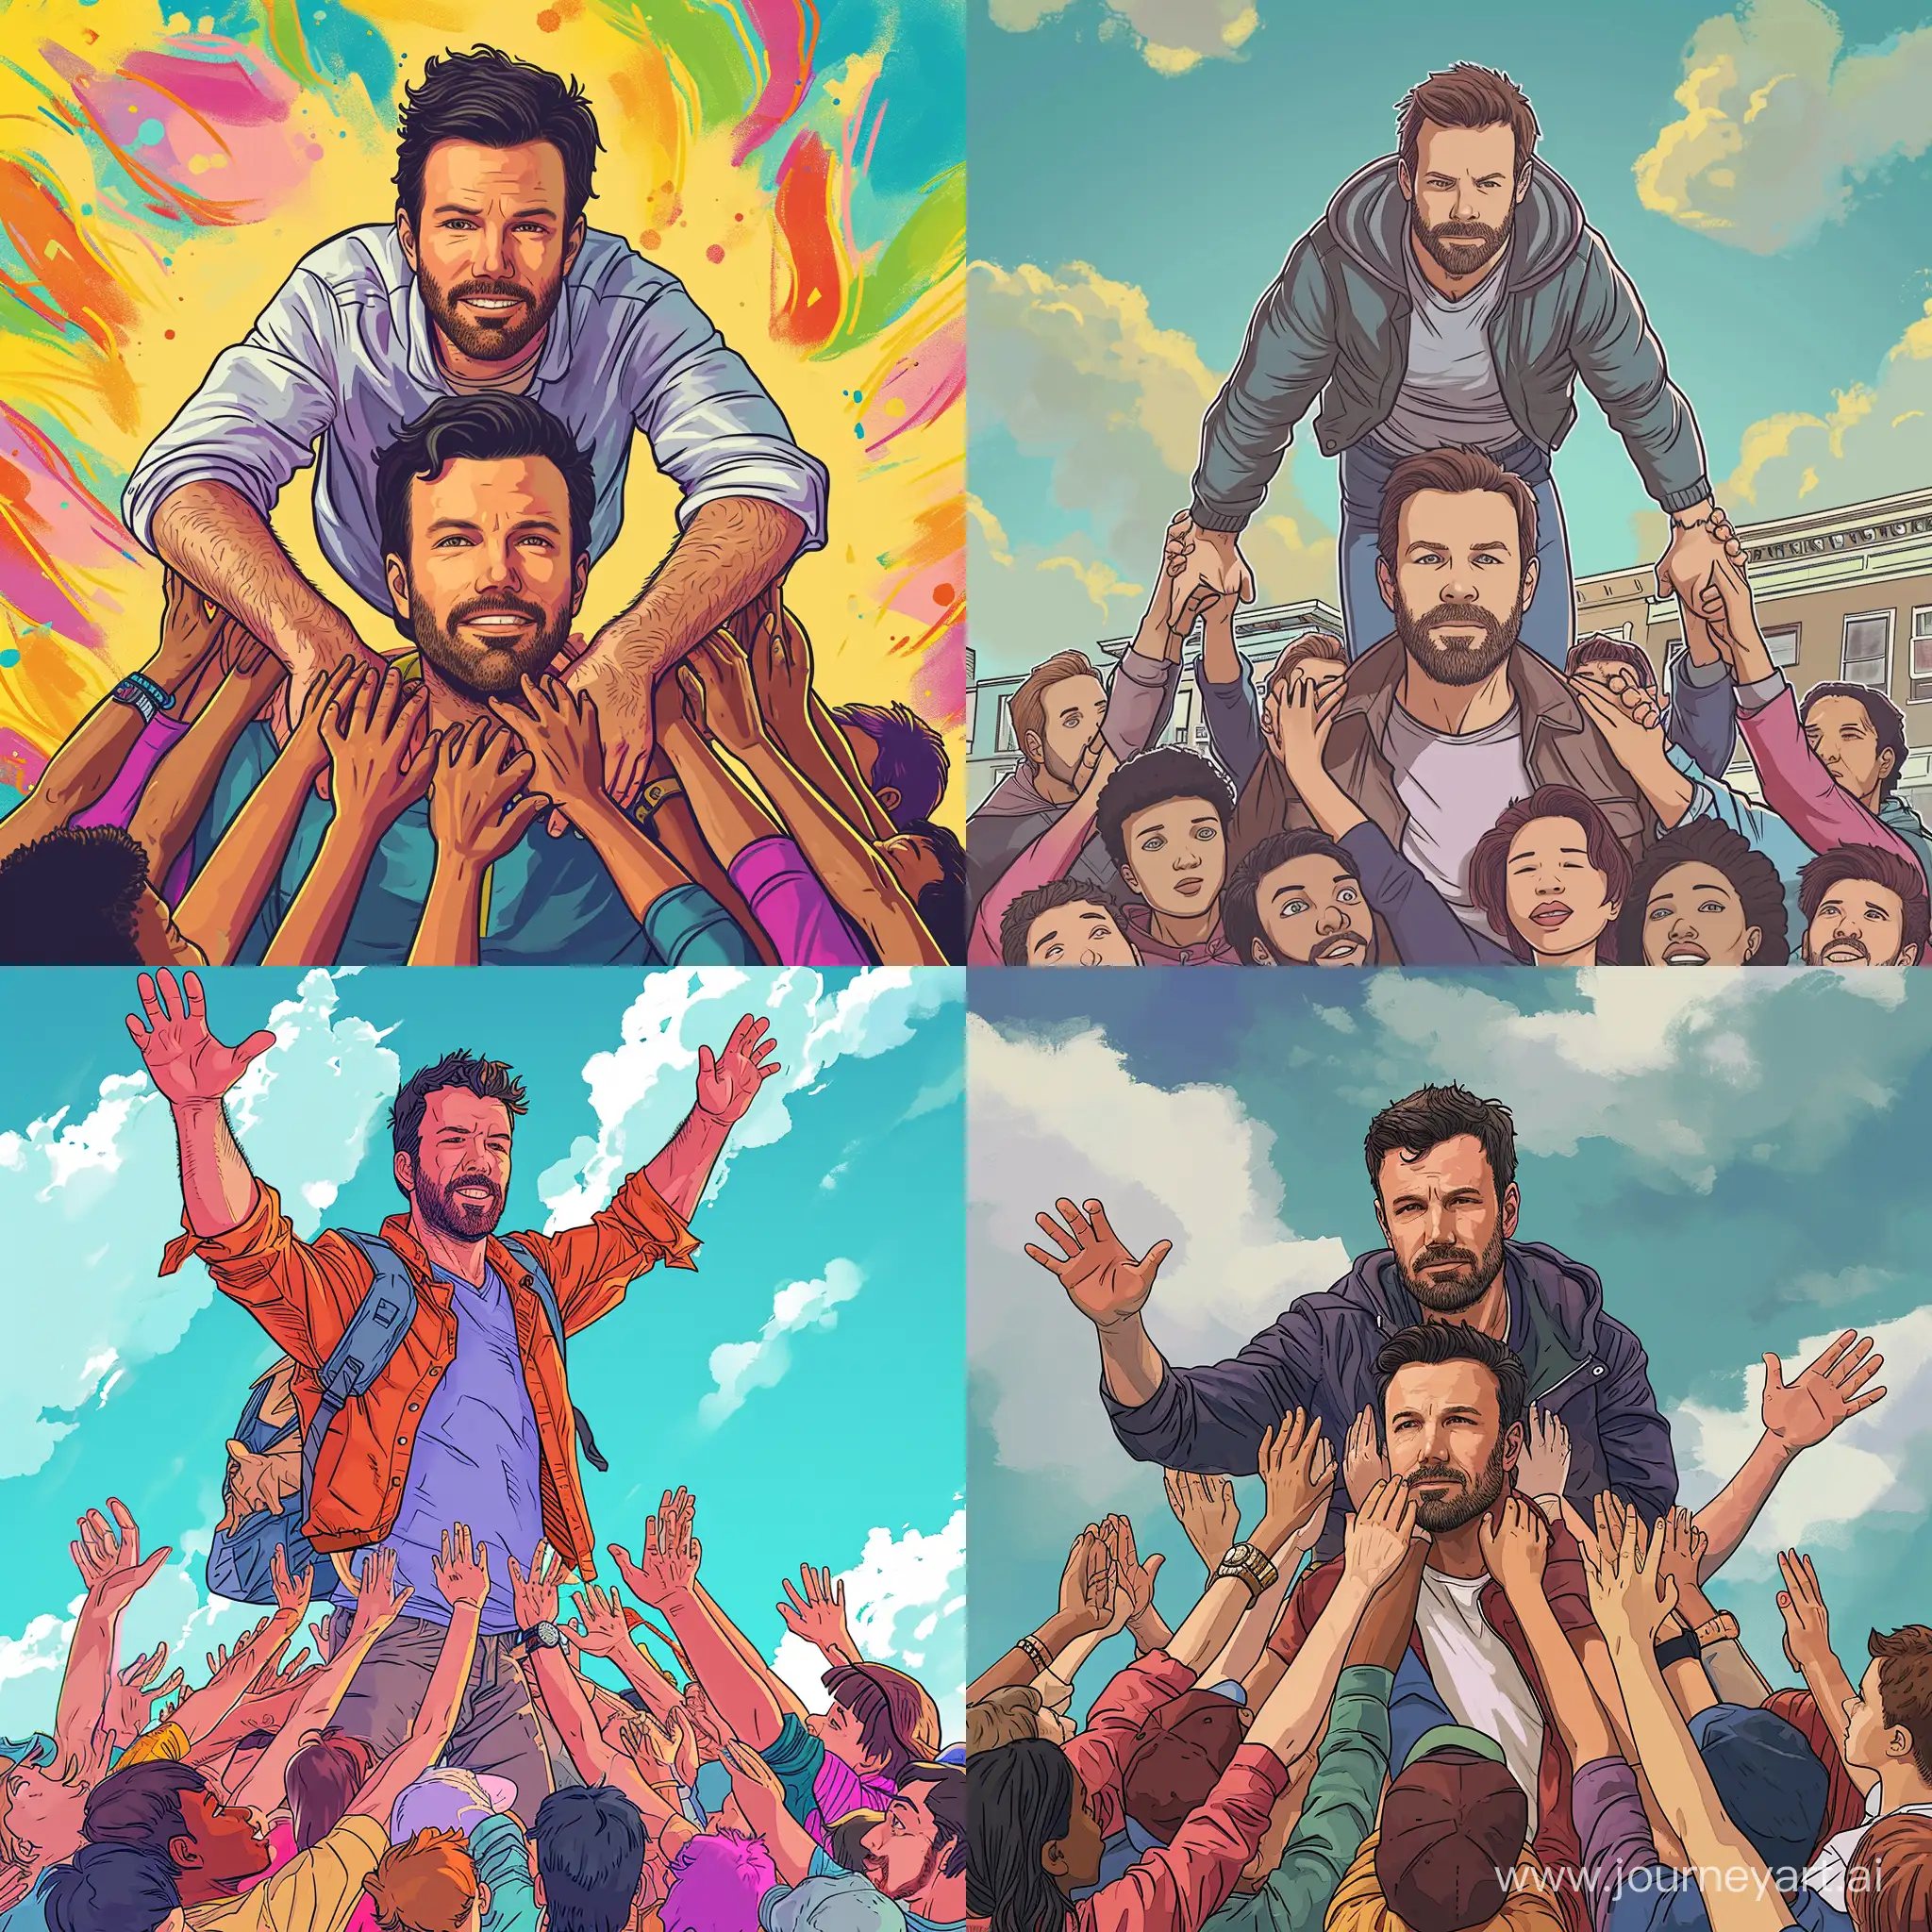 Ben affleck wants to send, go higher, the community wants to send him higher!! 90's nickolodeon cartoon style, make it look like the community is holding ben on top